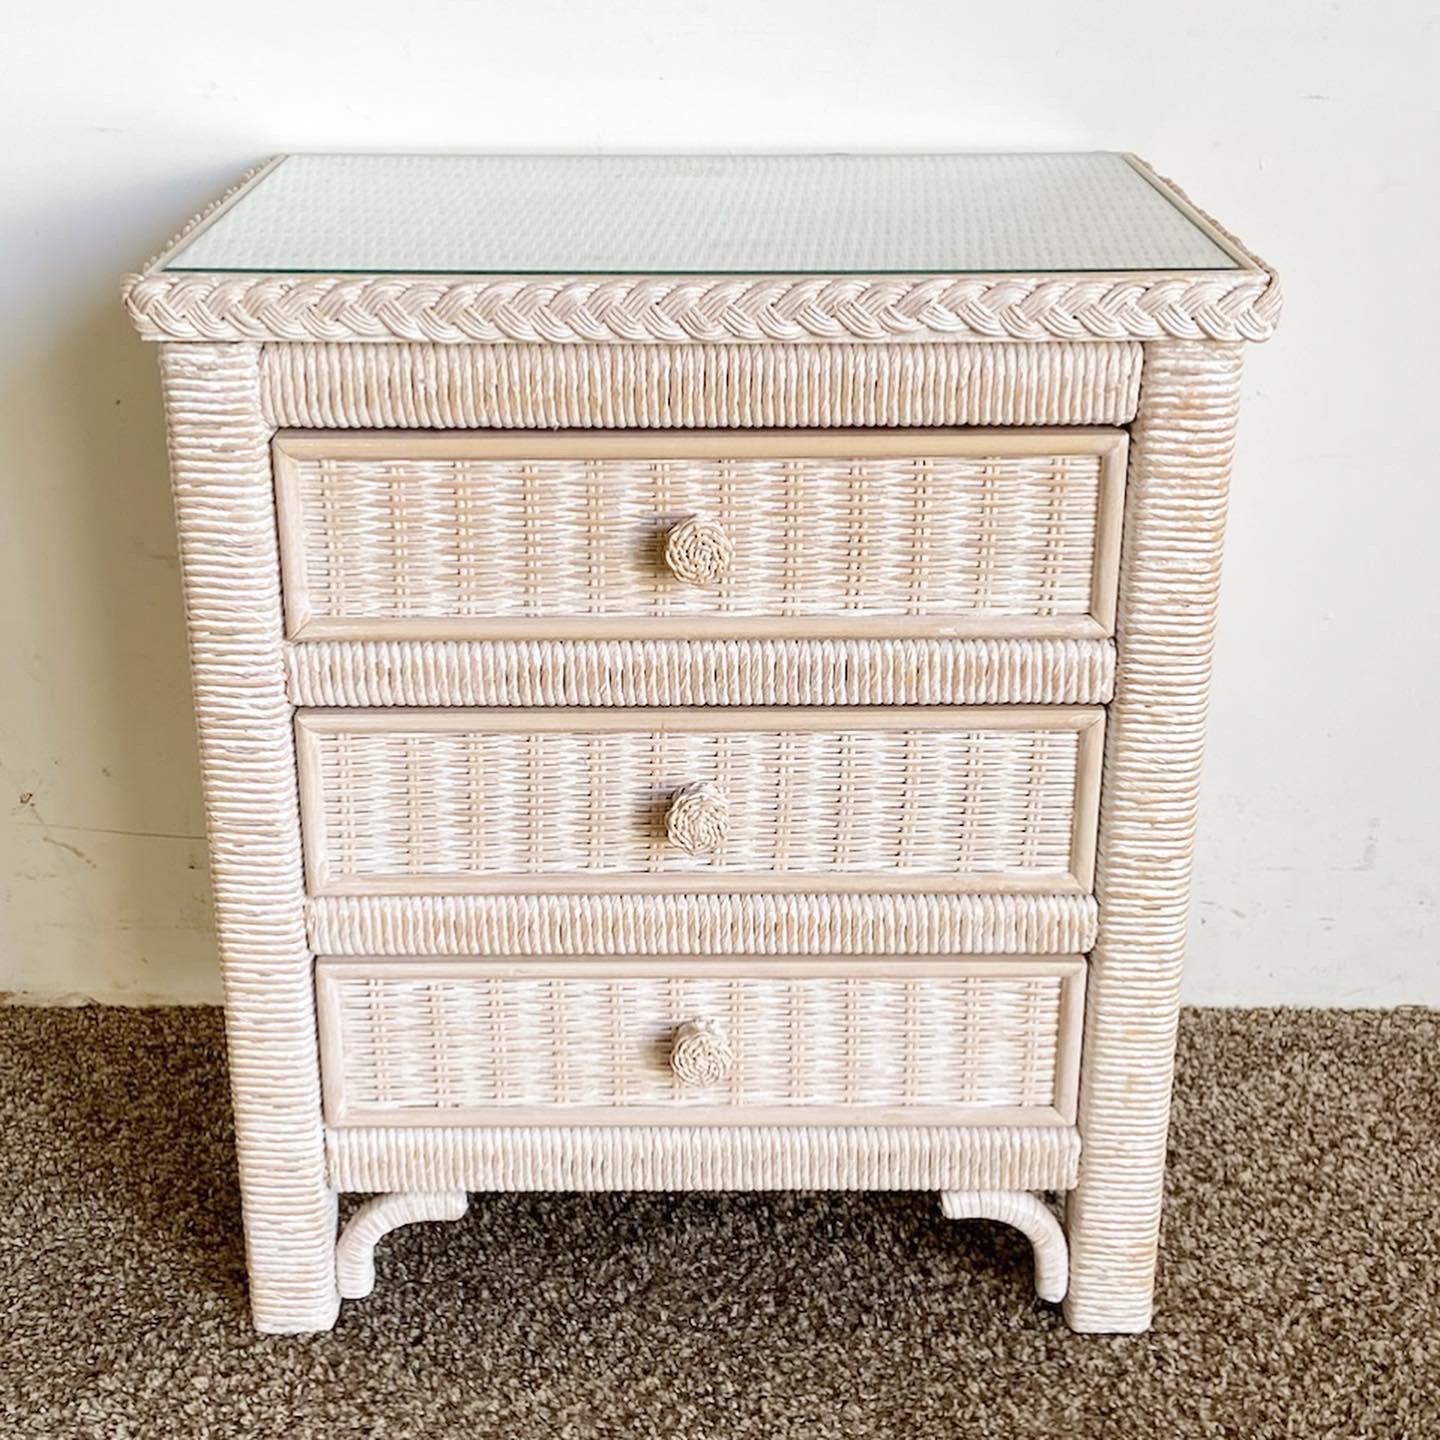 Add a touch of boho chic to your space with the wonderful vintage Lexington wicker rattan commode/nightstand by Henry Link. This piece features an inlaid glass top, pickle pink finish, and provides both style and functionality.

Wonderful vintage